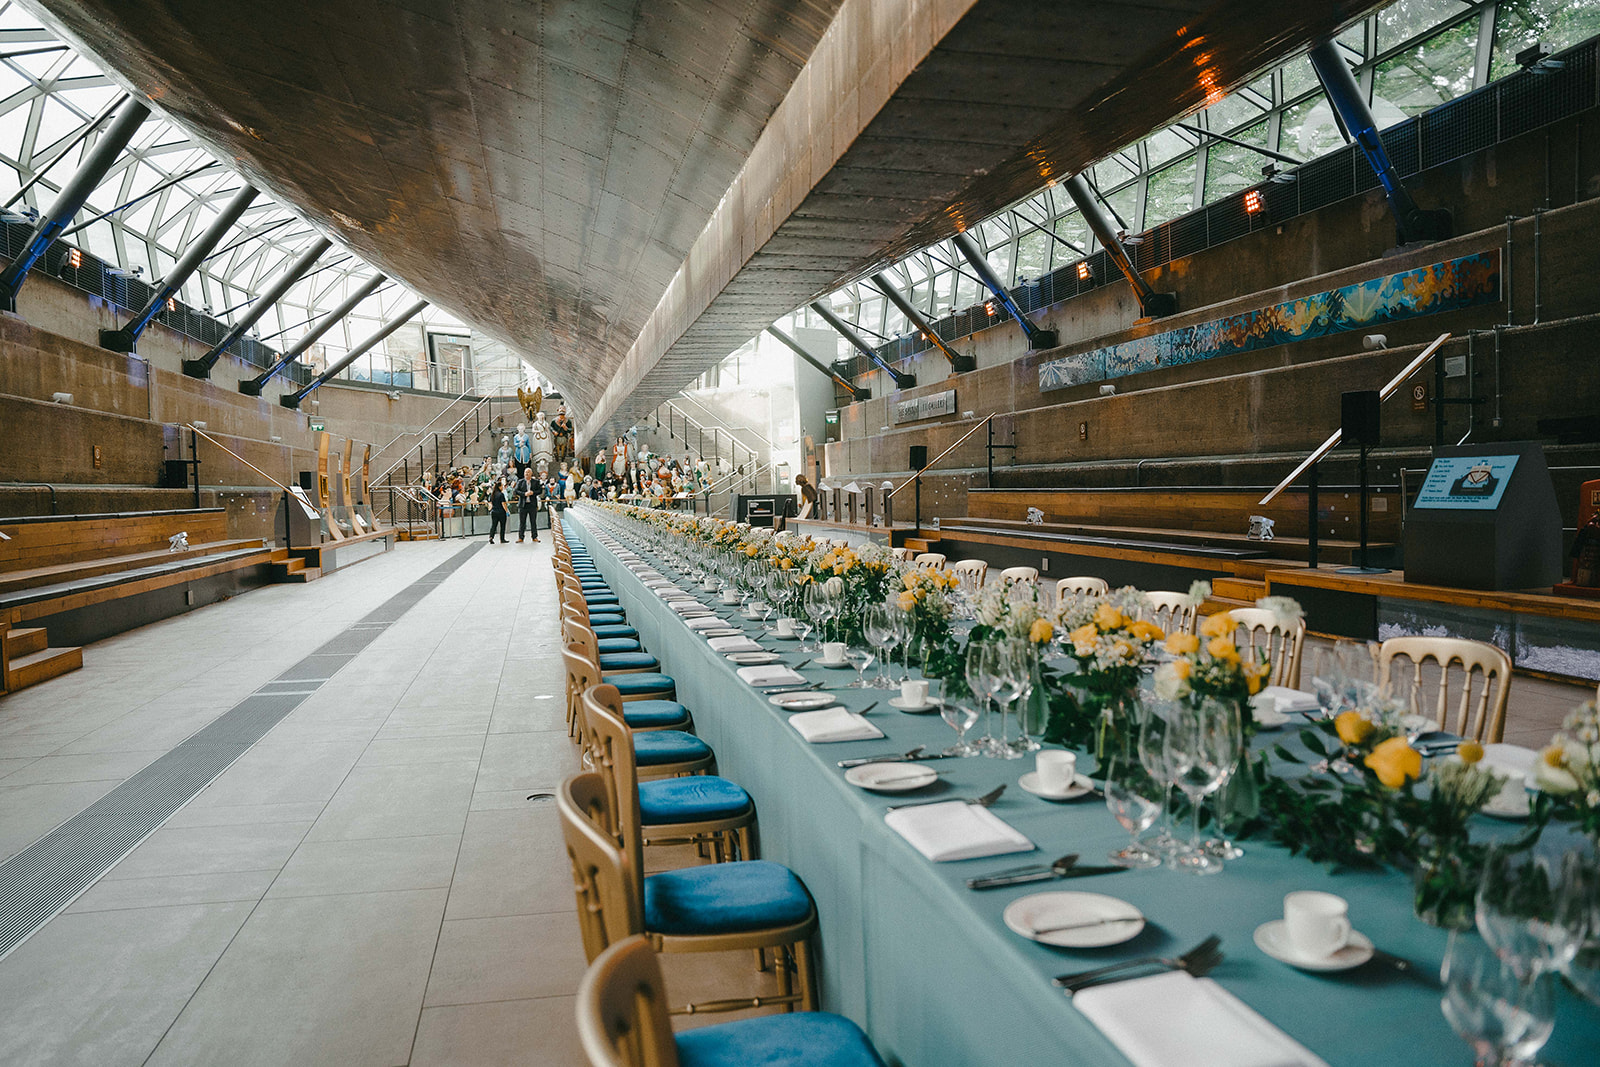 View of the great hall beneath the Cutty Sark with a long dining table in teal and yellow.